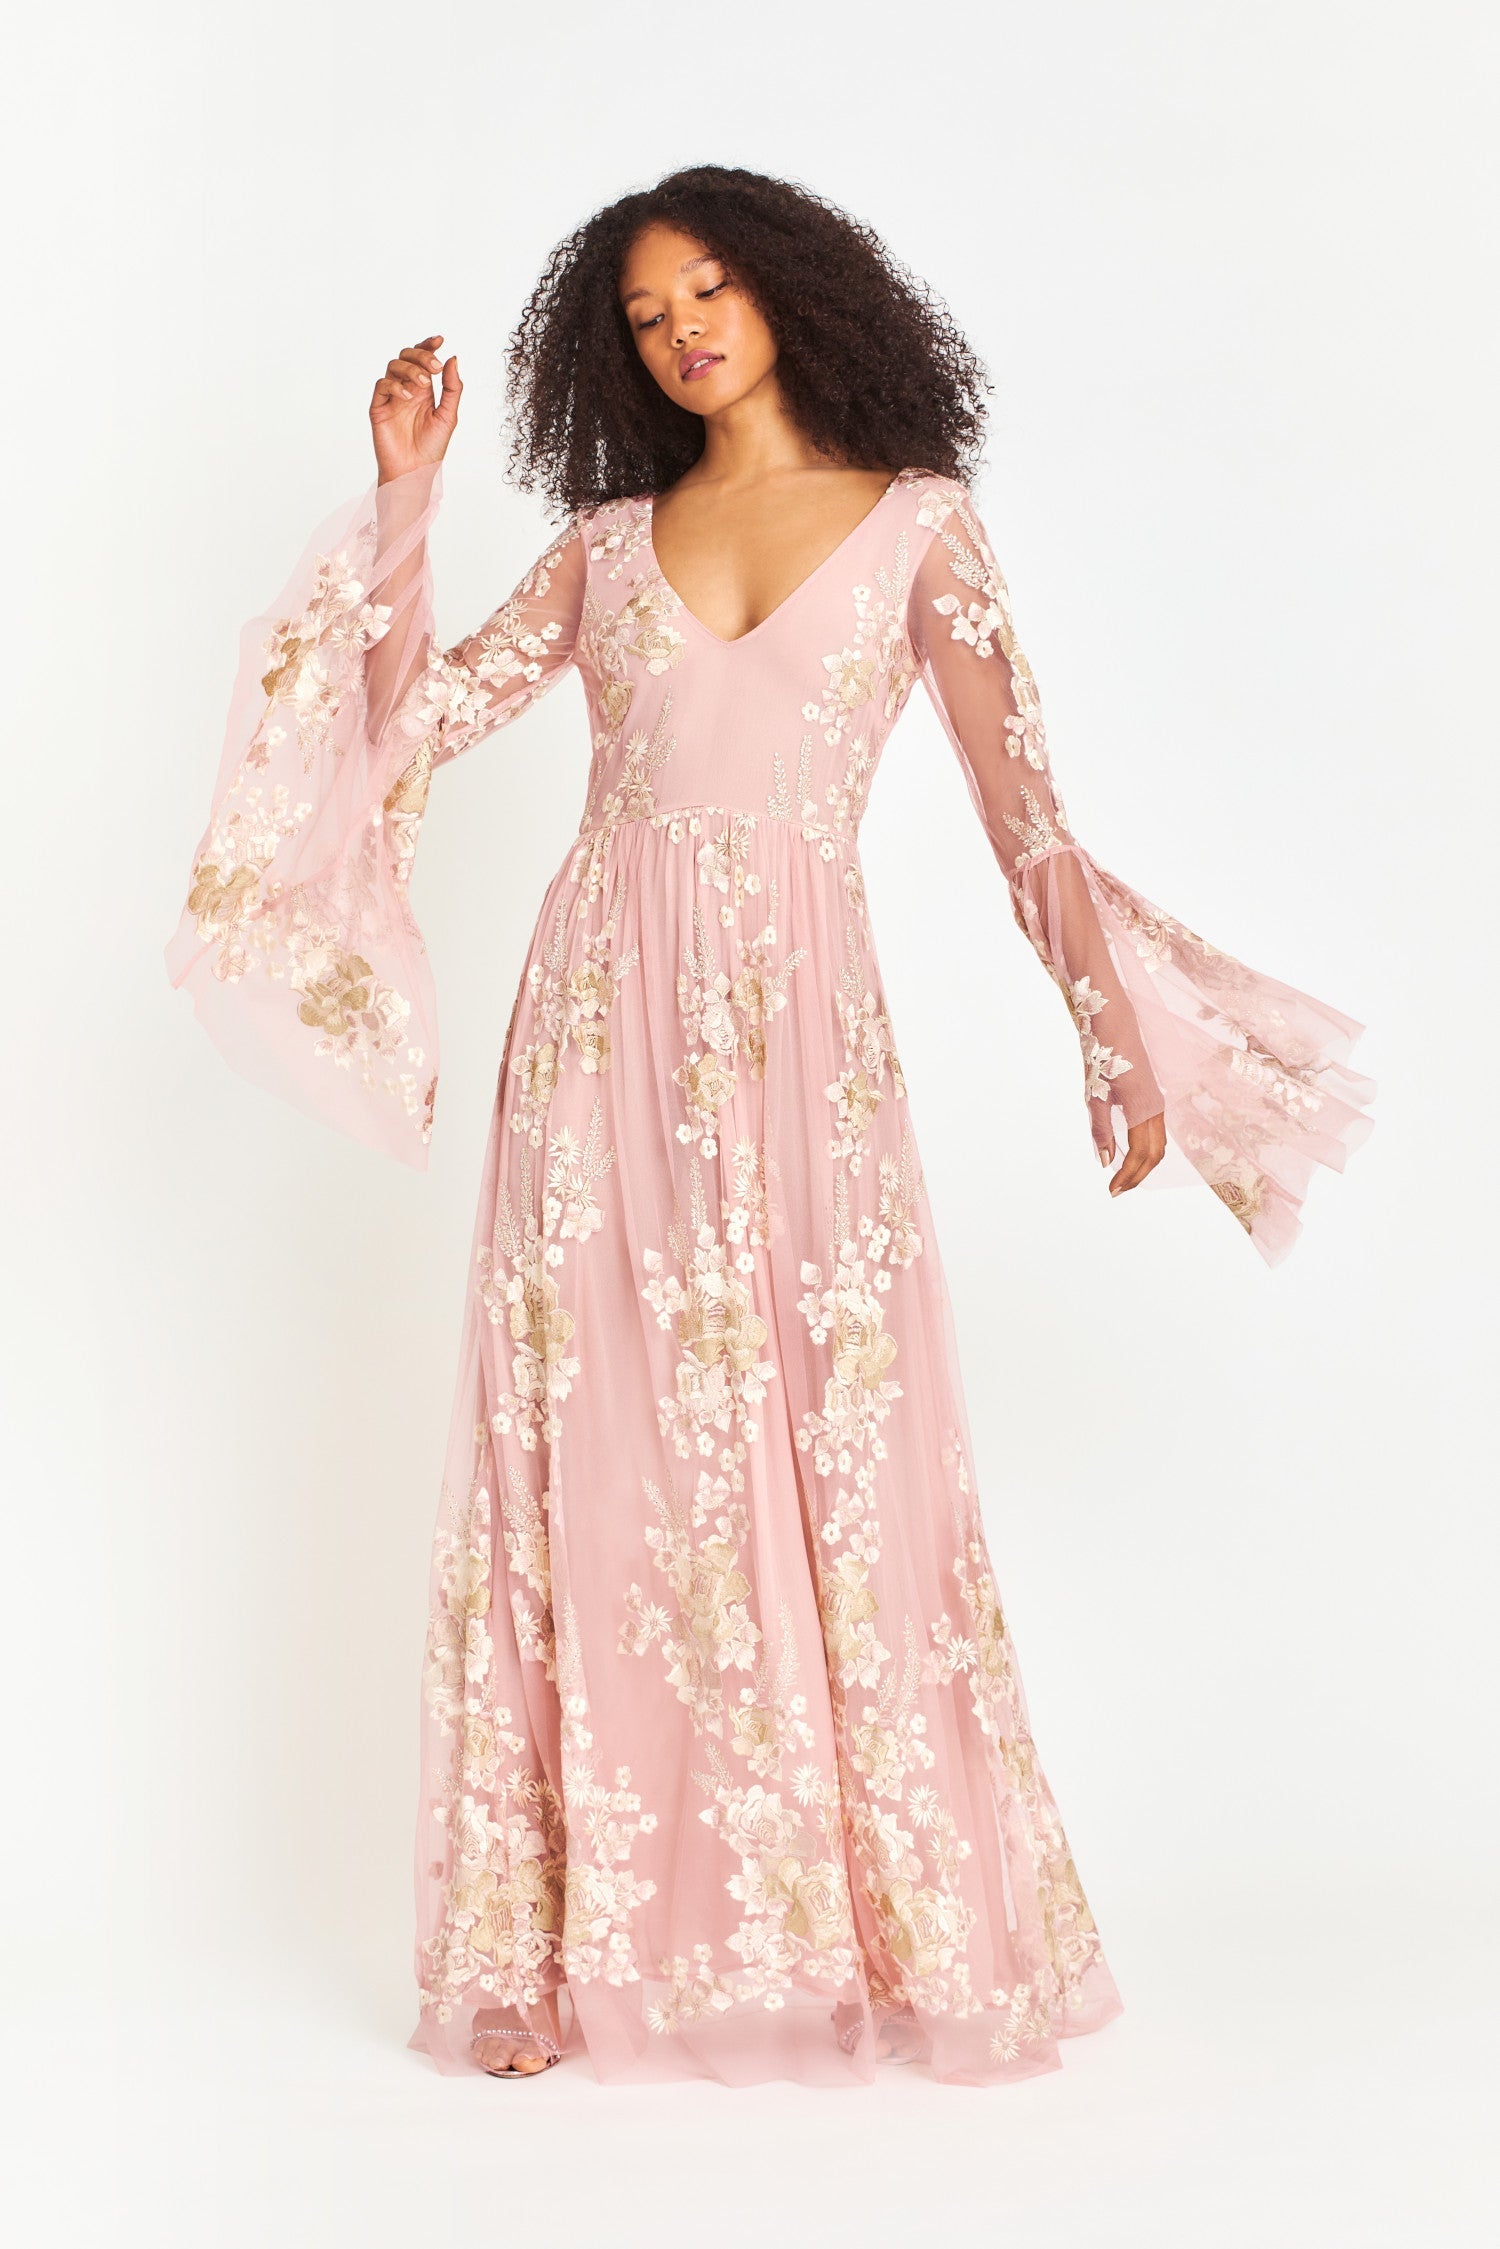 Pink maxi dress features a plunging neckline and high to low bell sleeves with floral applique